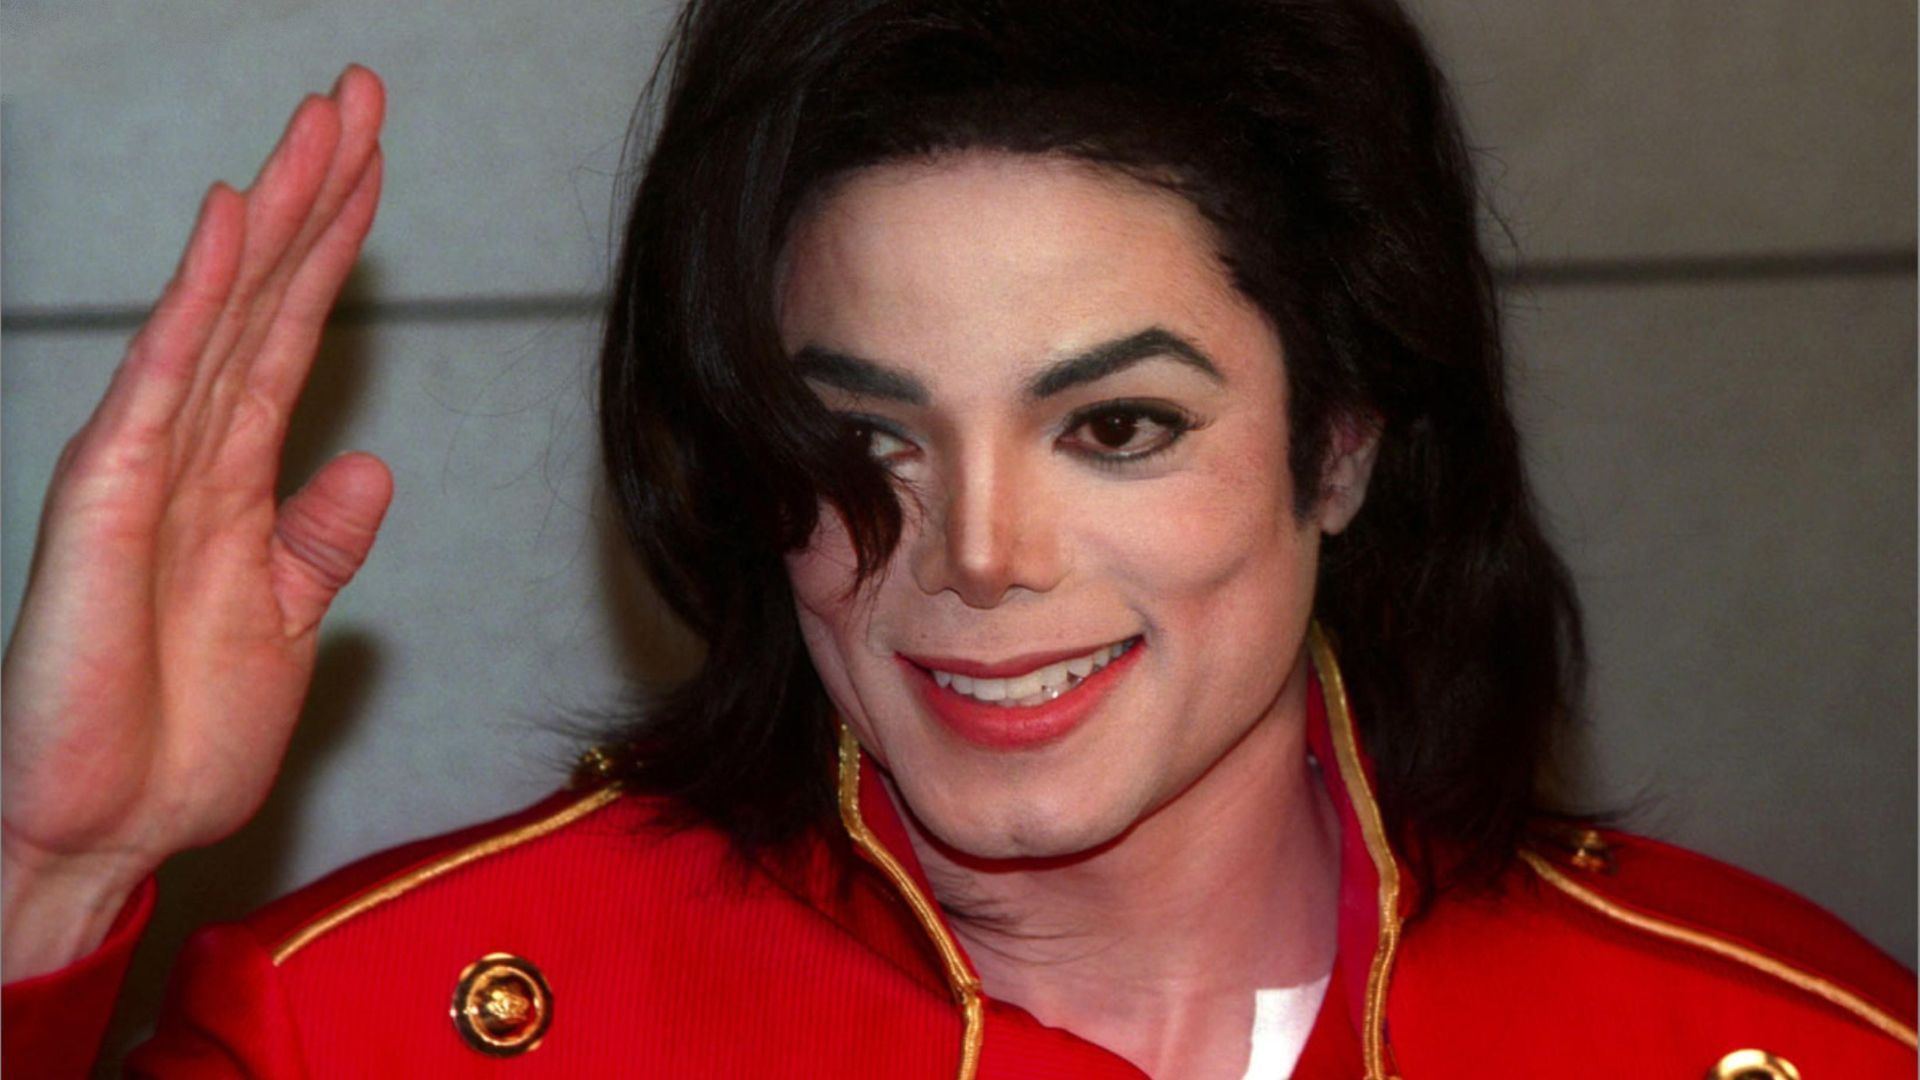 Male Celebrities: Michael Jackson, created by visionFez, picture nr. 38126